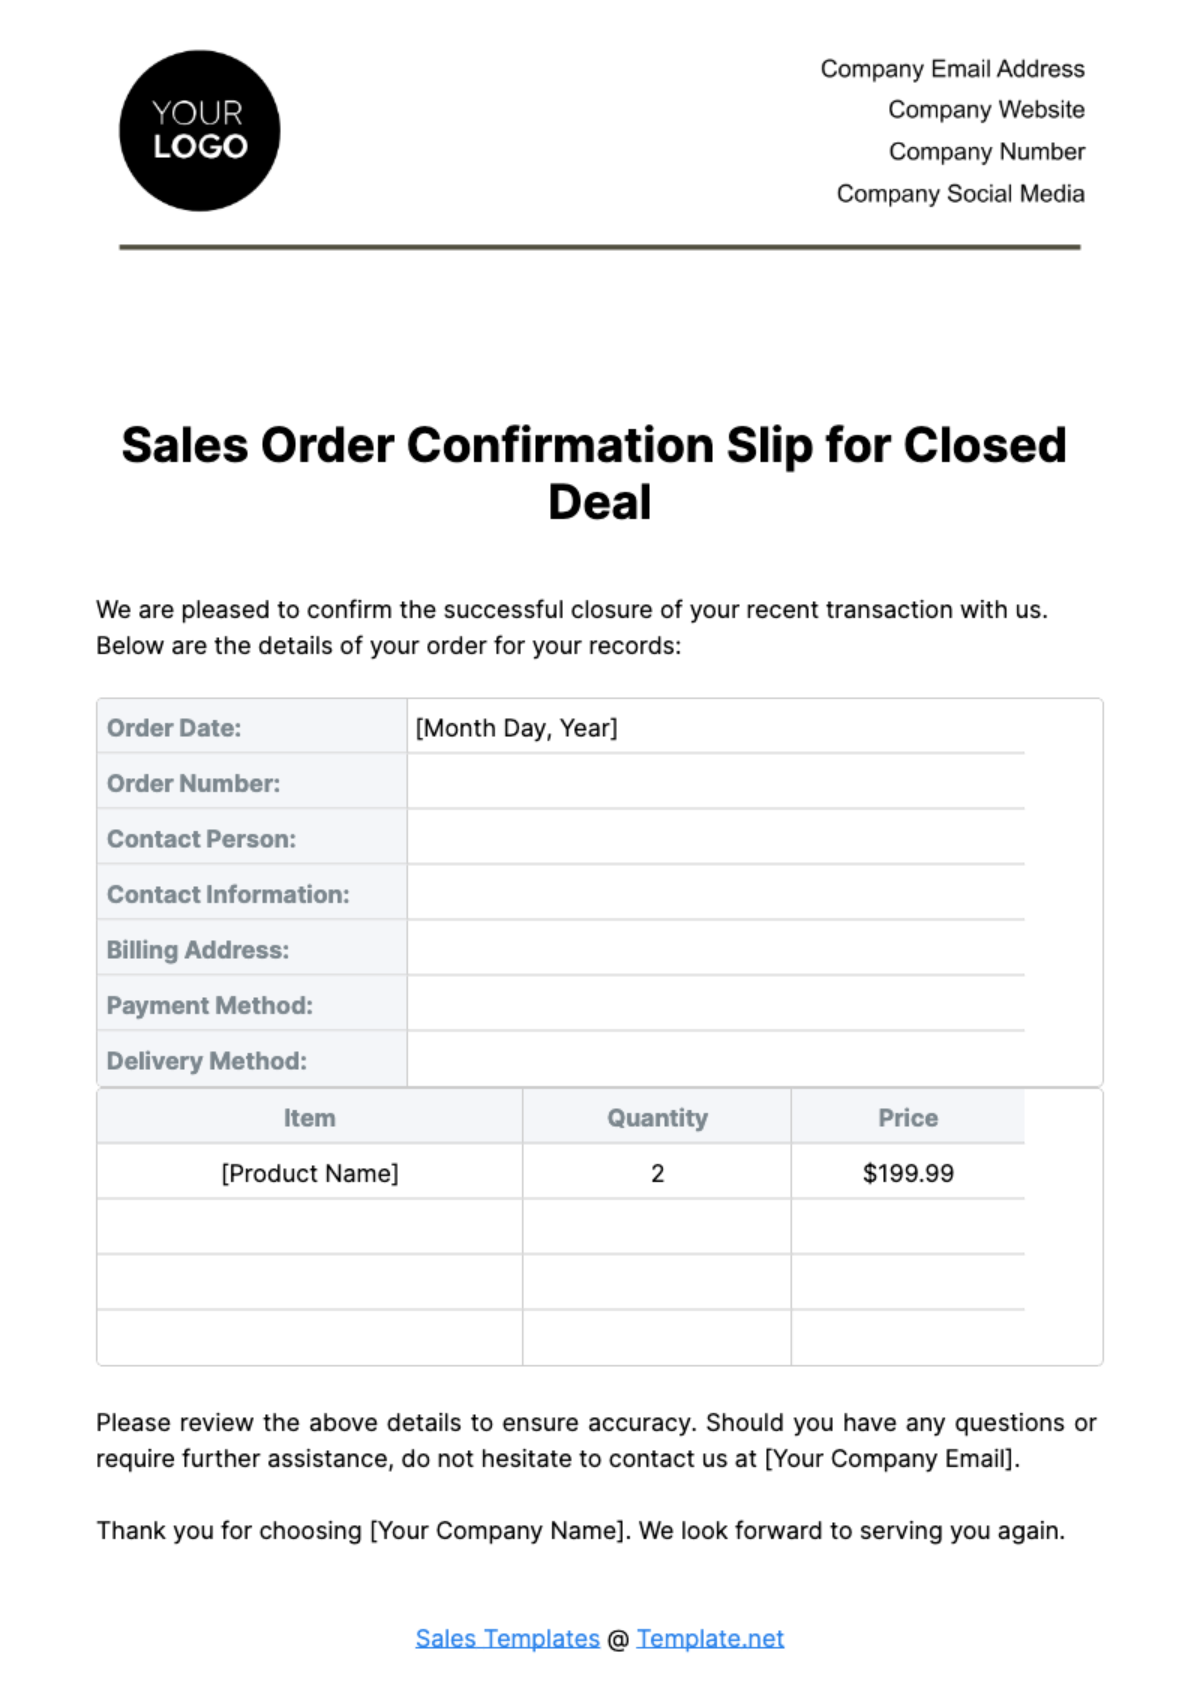 Free Sales Order Confirmation Slip for Closed Deal Template